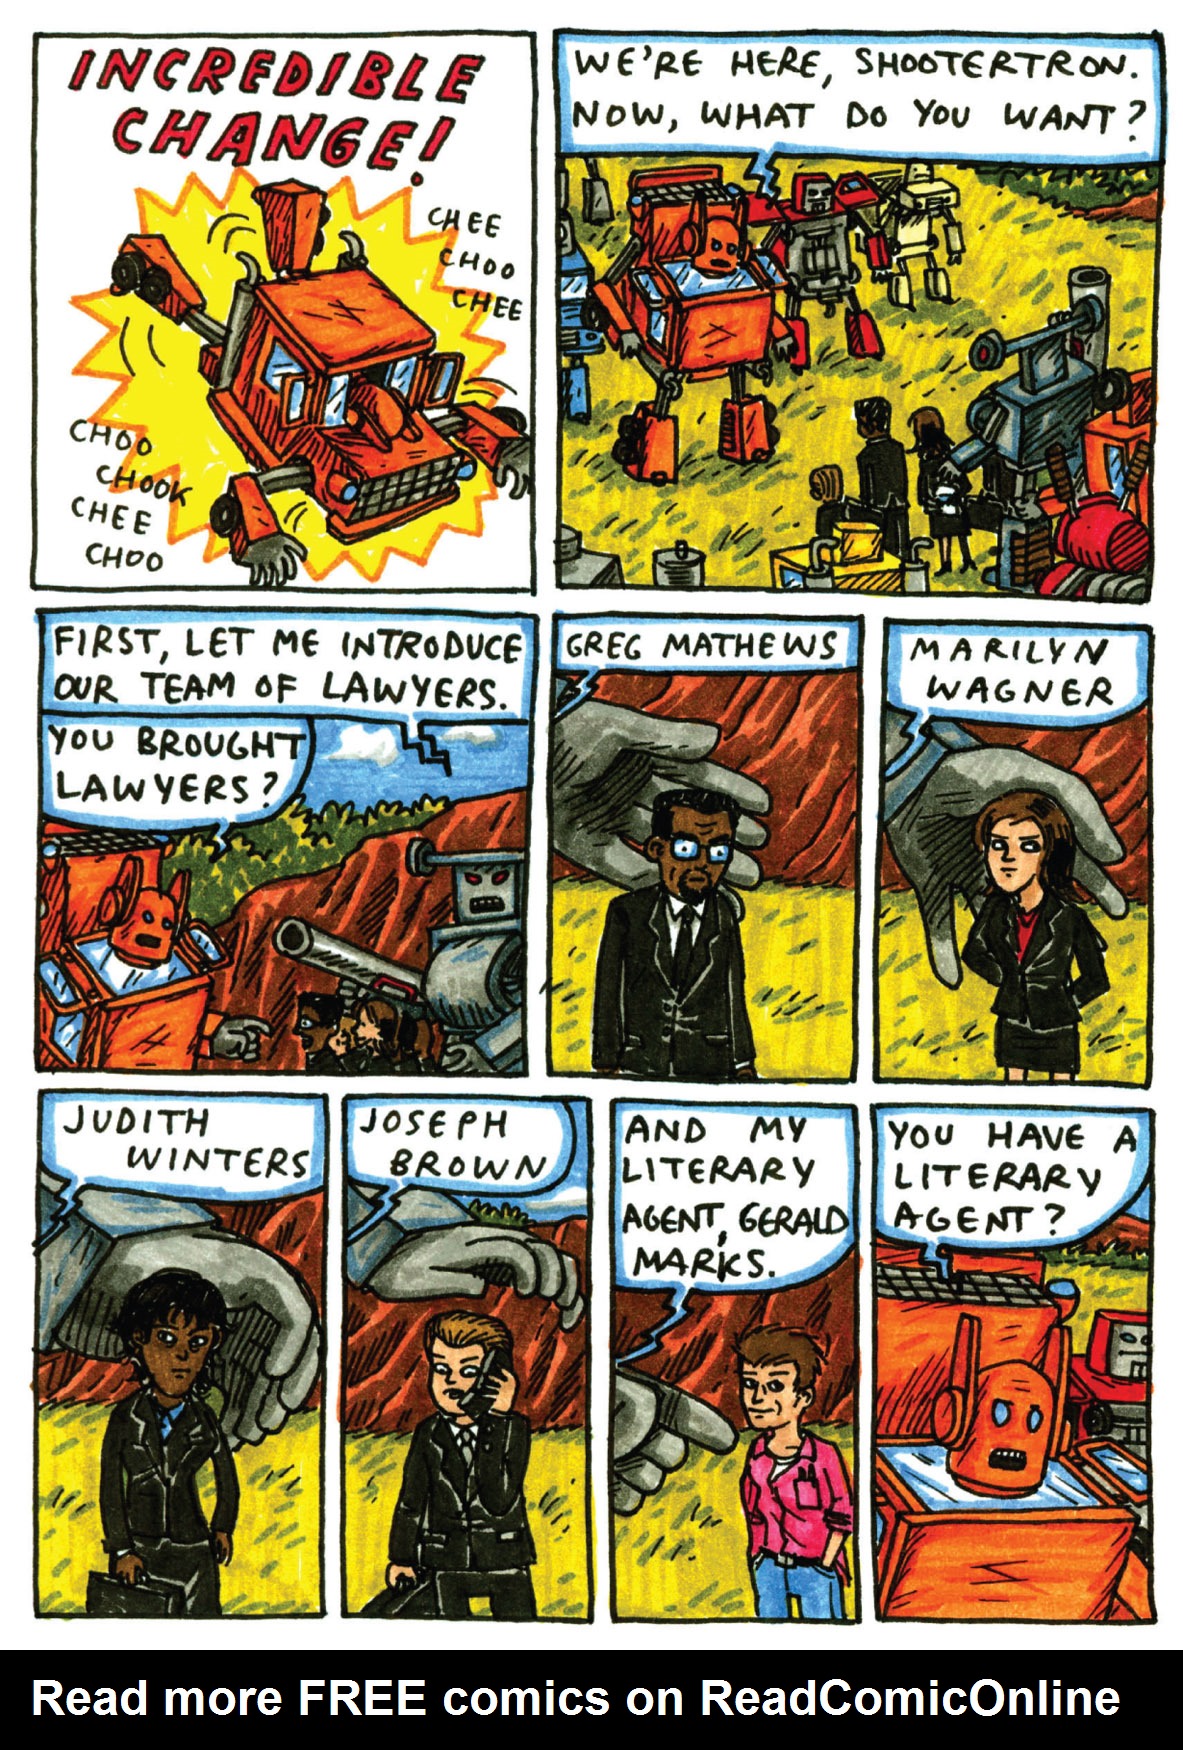 Read online Incredible Change-Bots comic -  Issue # TPB 2 - 106